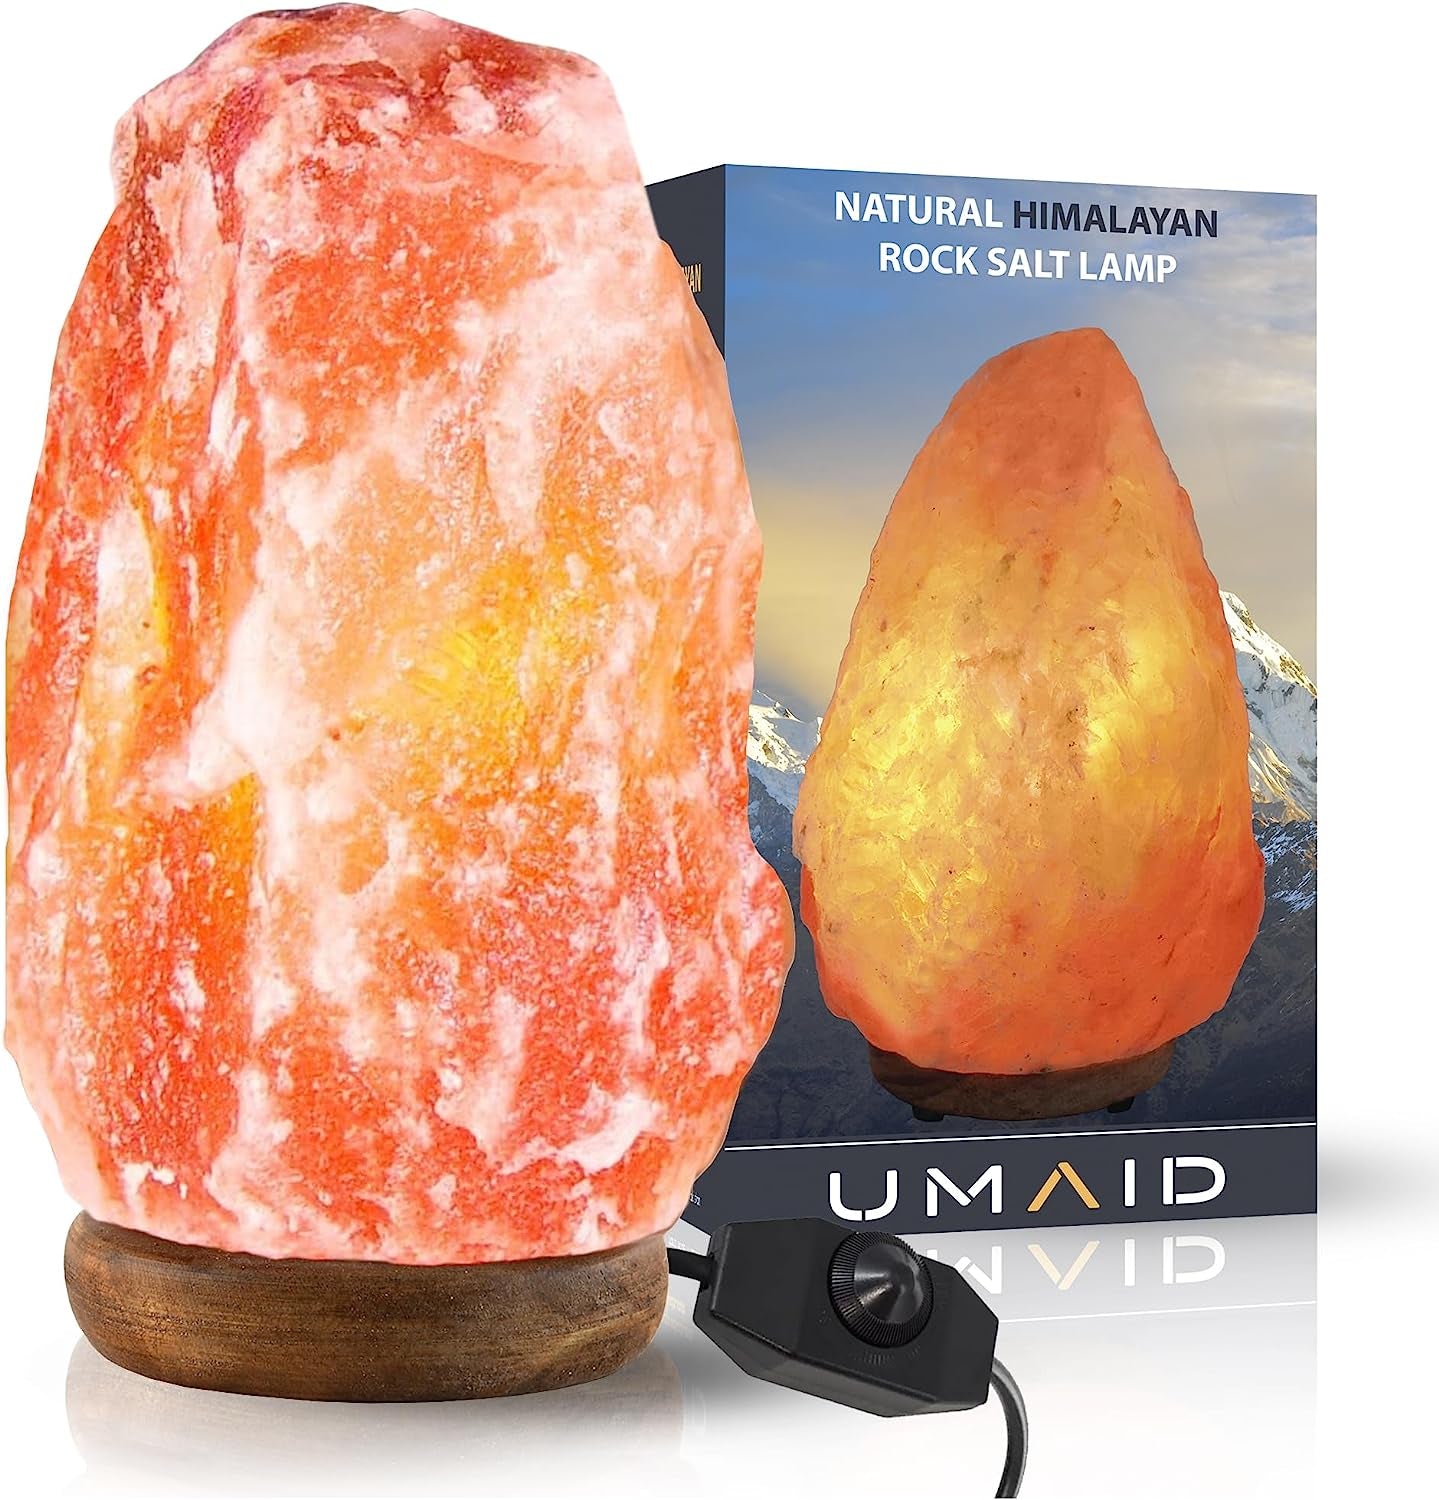 Natural Himalayan Salt Lamp Bowl with 6 Heated Salt Massage Balls, Stylish Wood Base, Bulb with Dimmable Switch Ul-Listed Cord